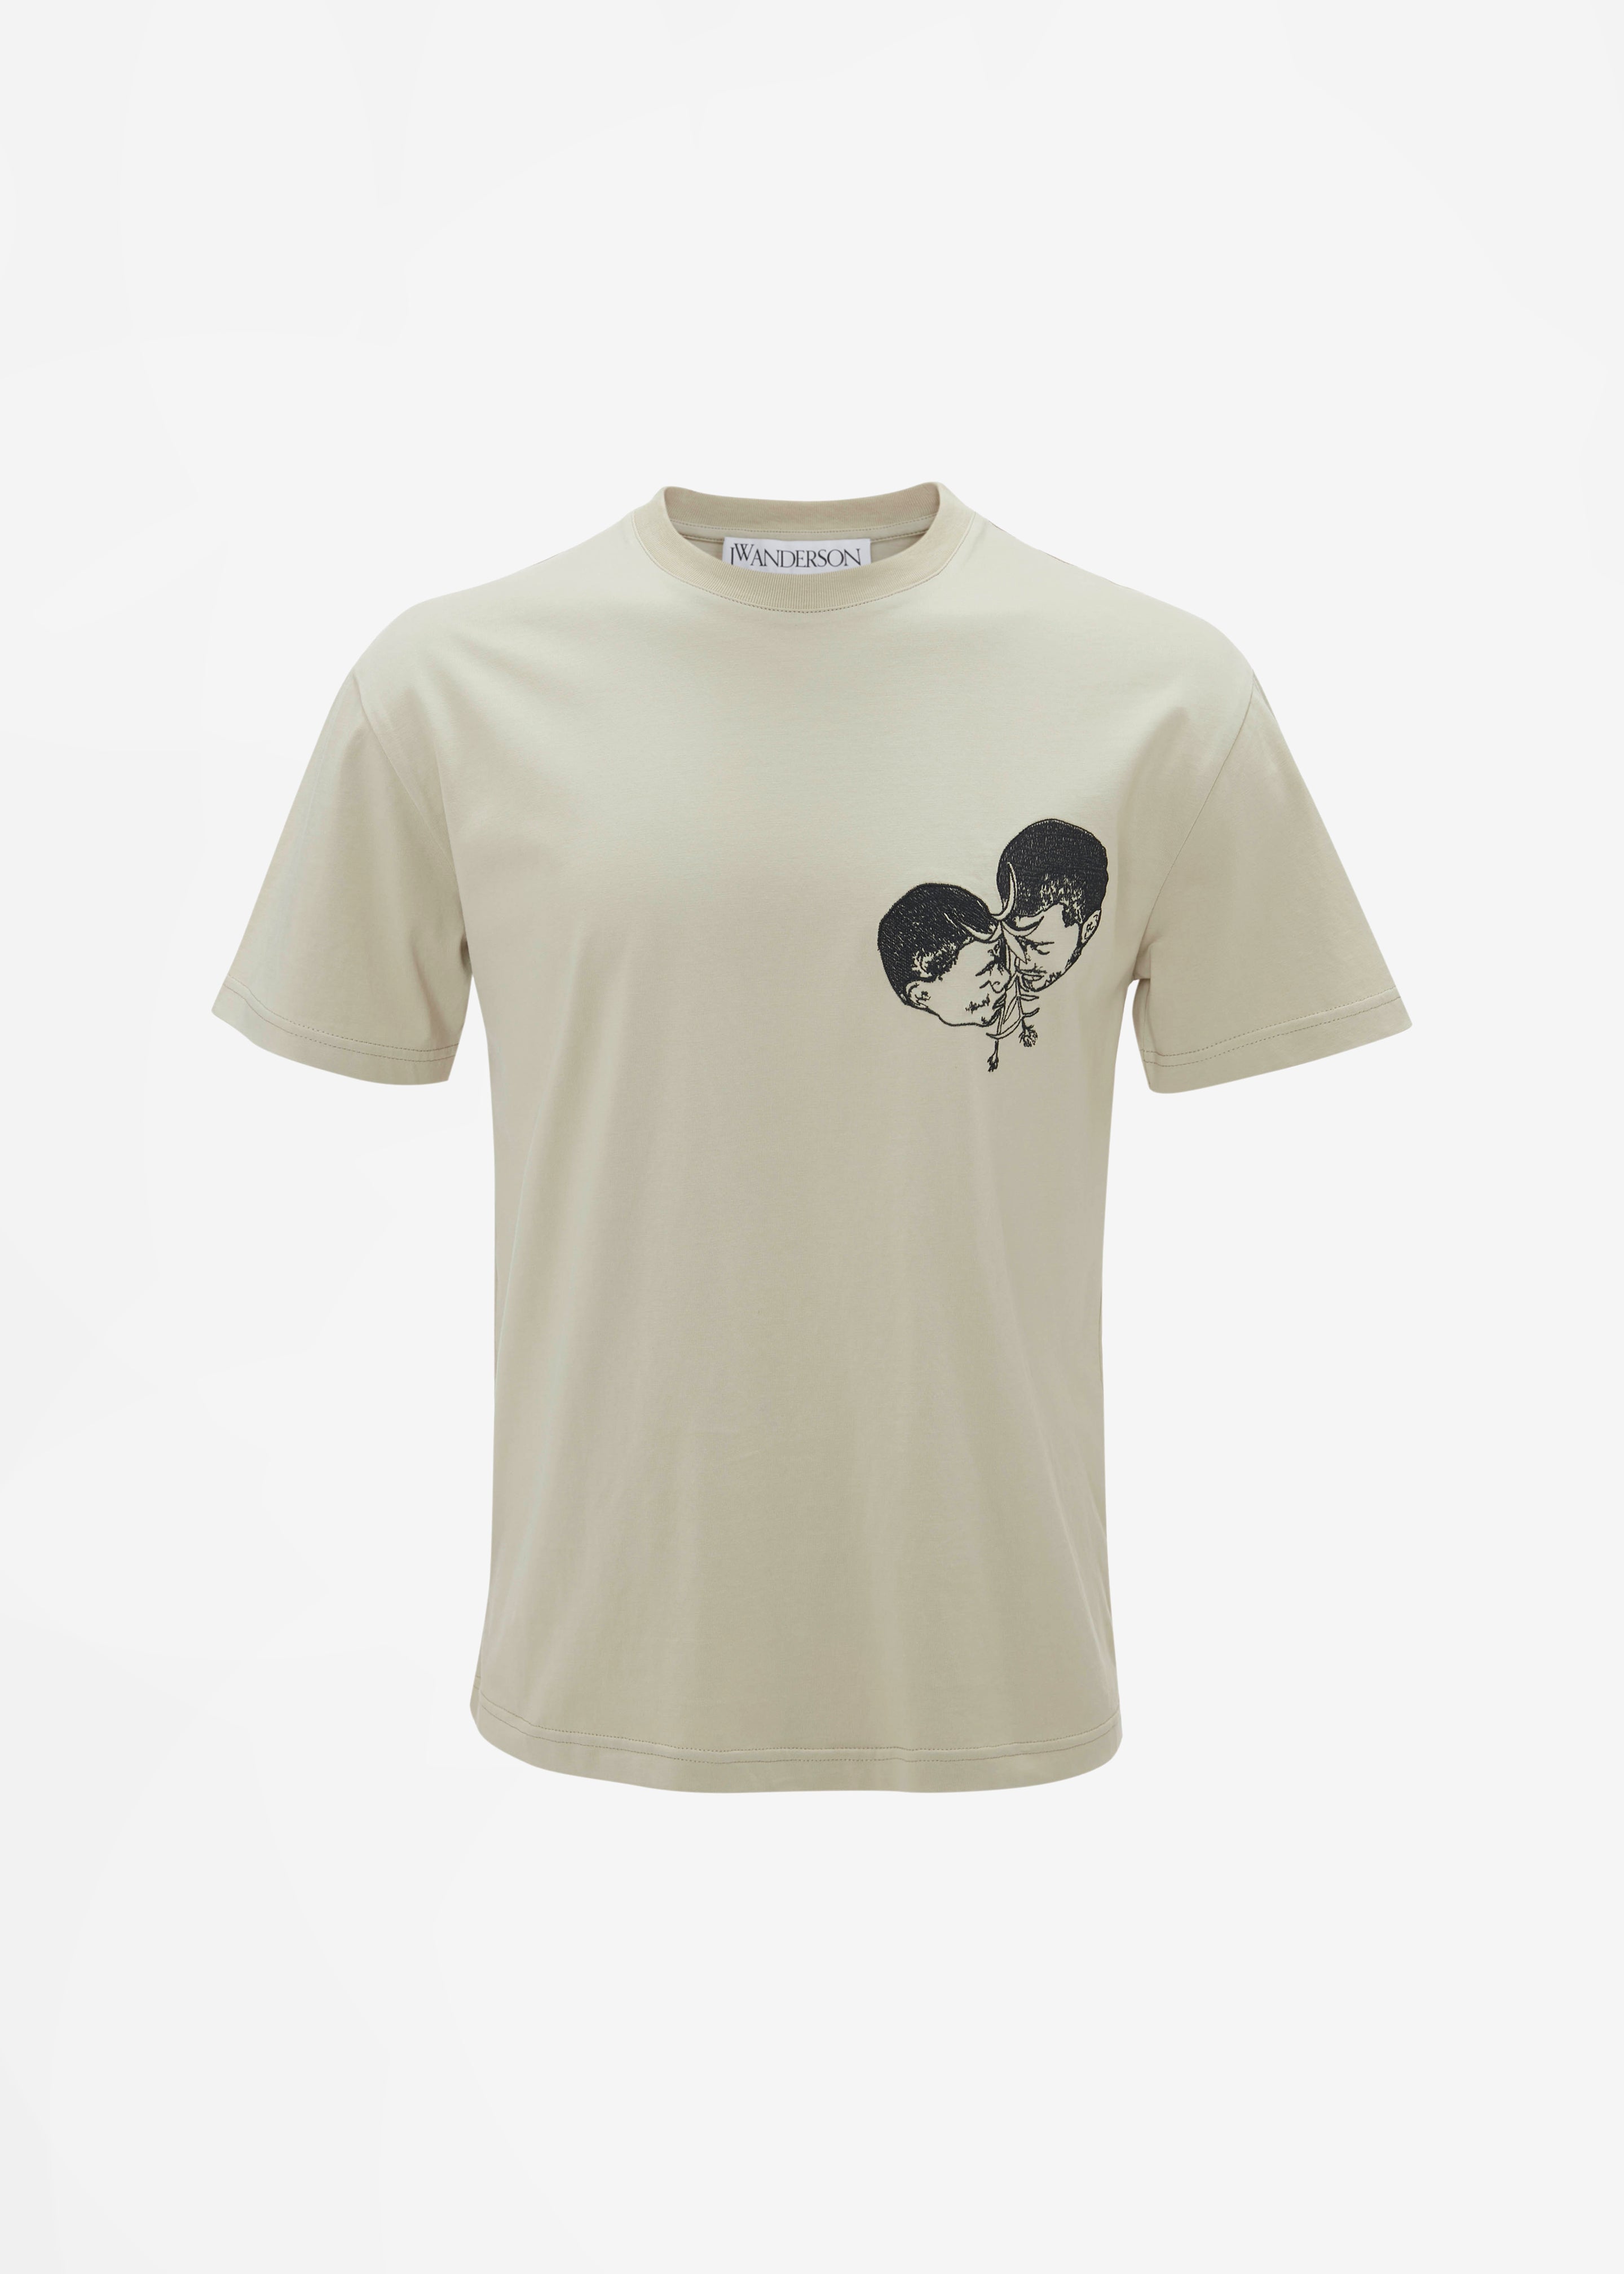 JW Anderson Polo Couple Embroidery T-Shirt - Beige - 6